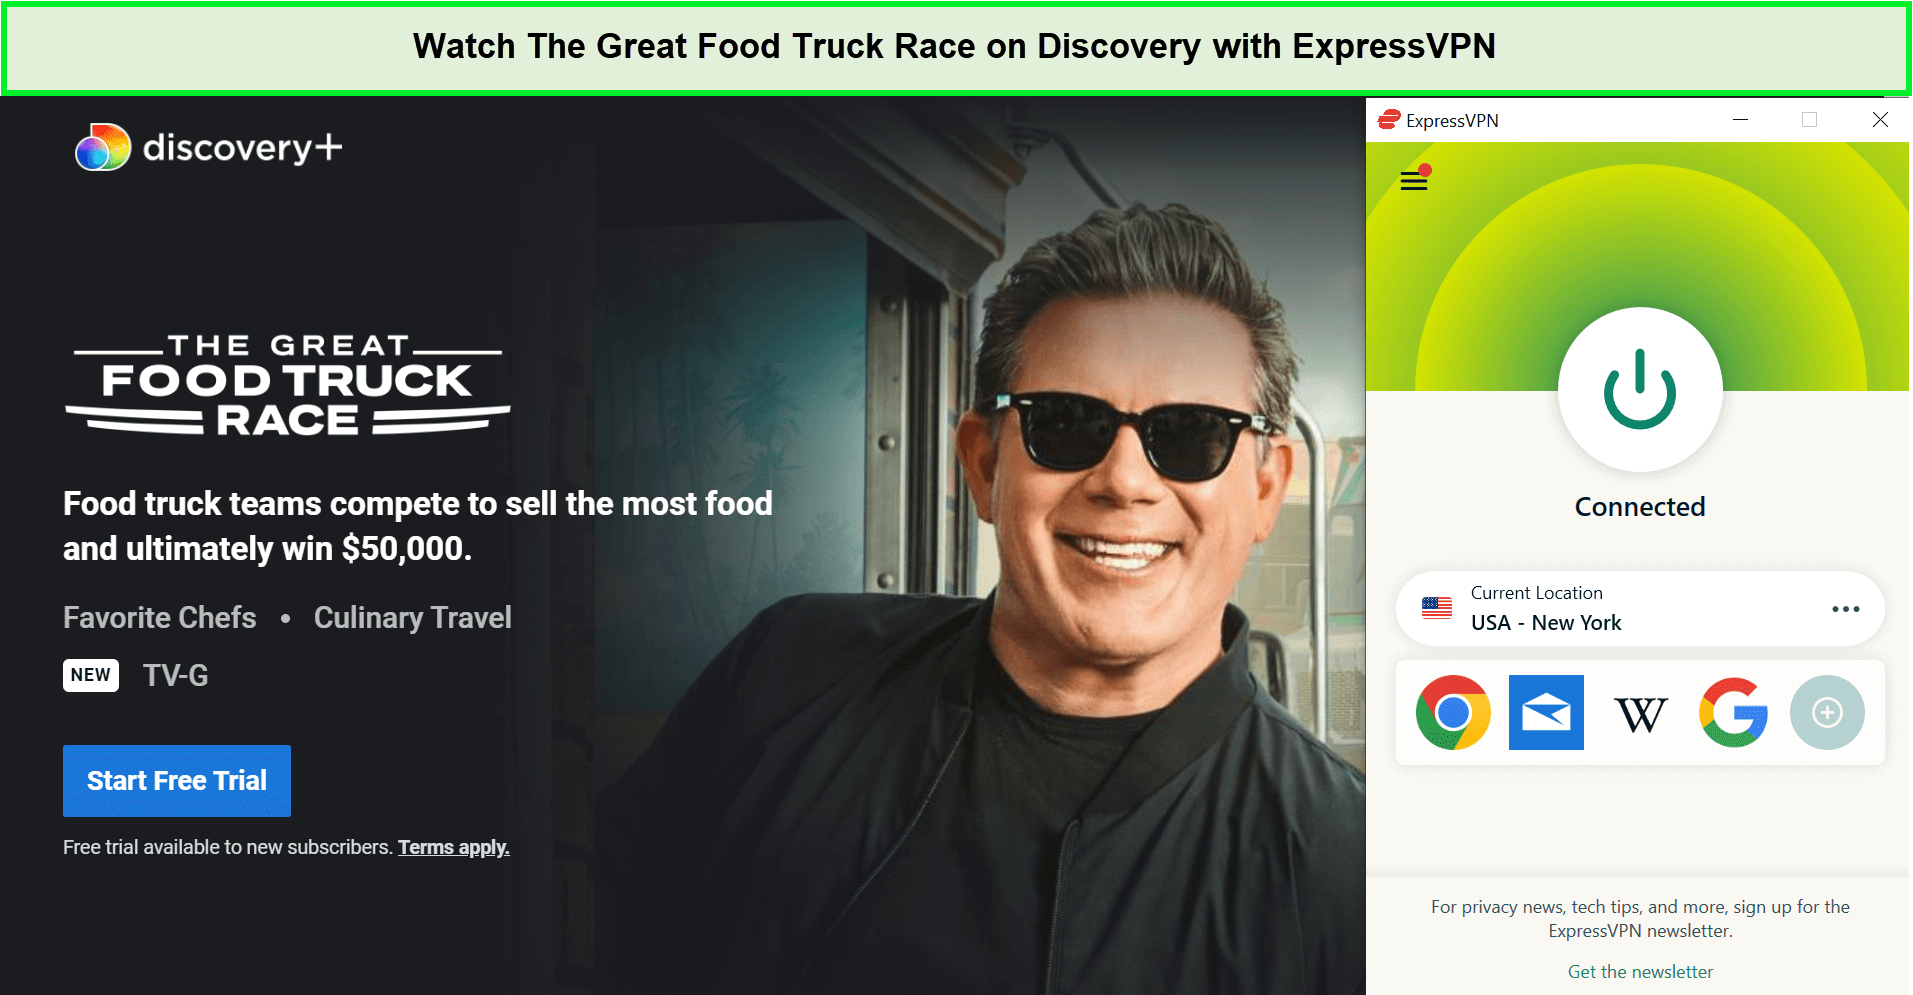 Watch-The-Great-Food-Truck-Race-in-ca-on-Discovery-with-ExpressVPN